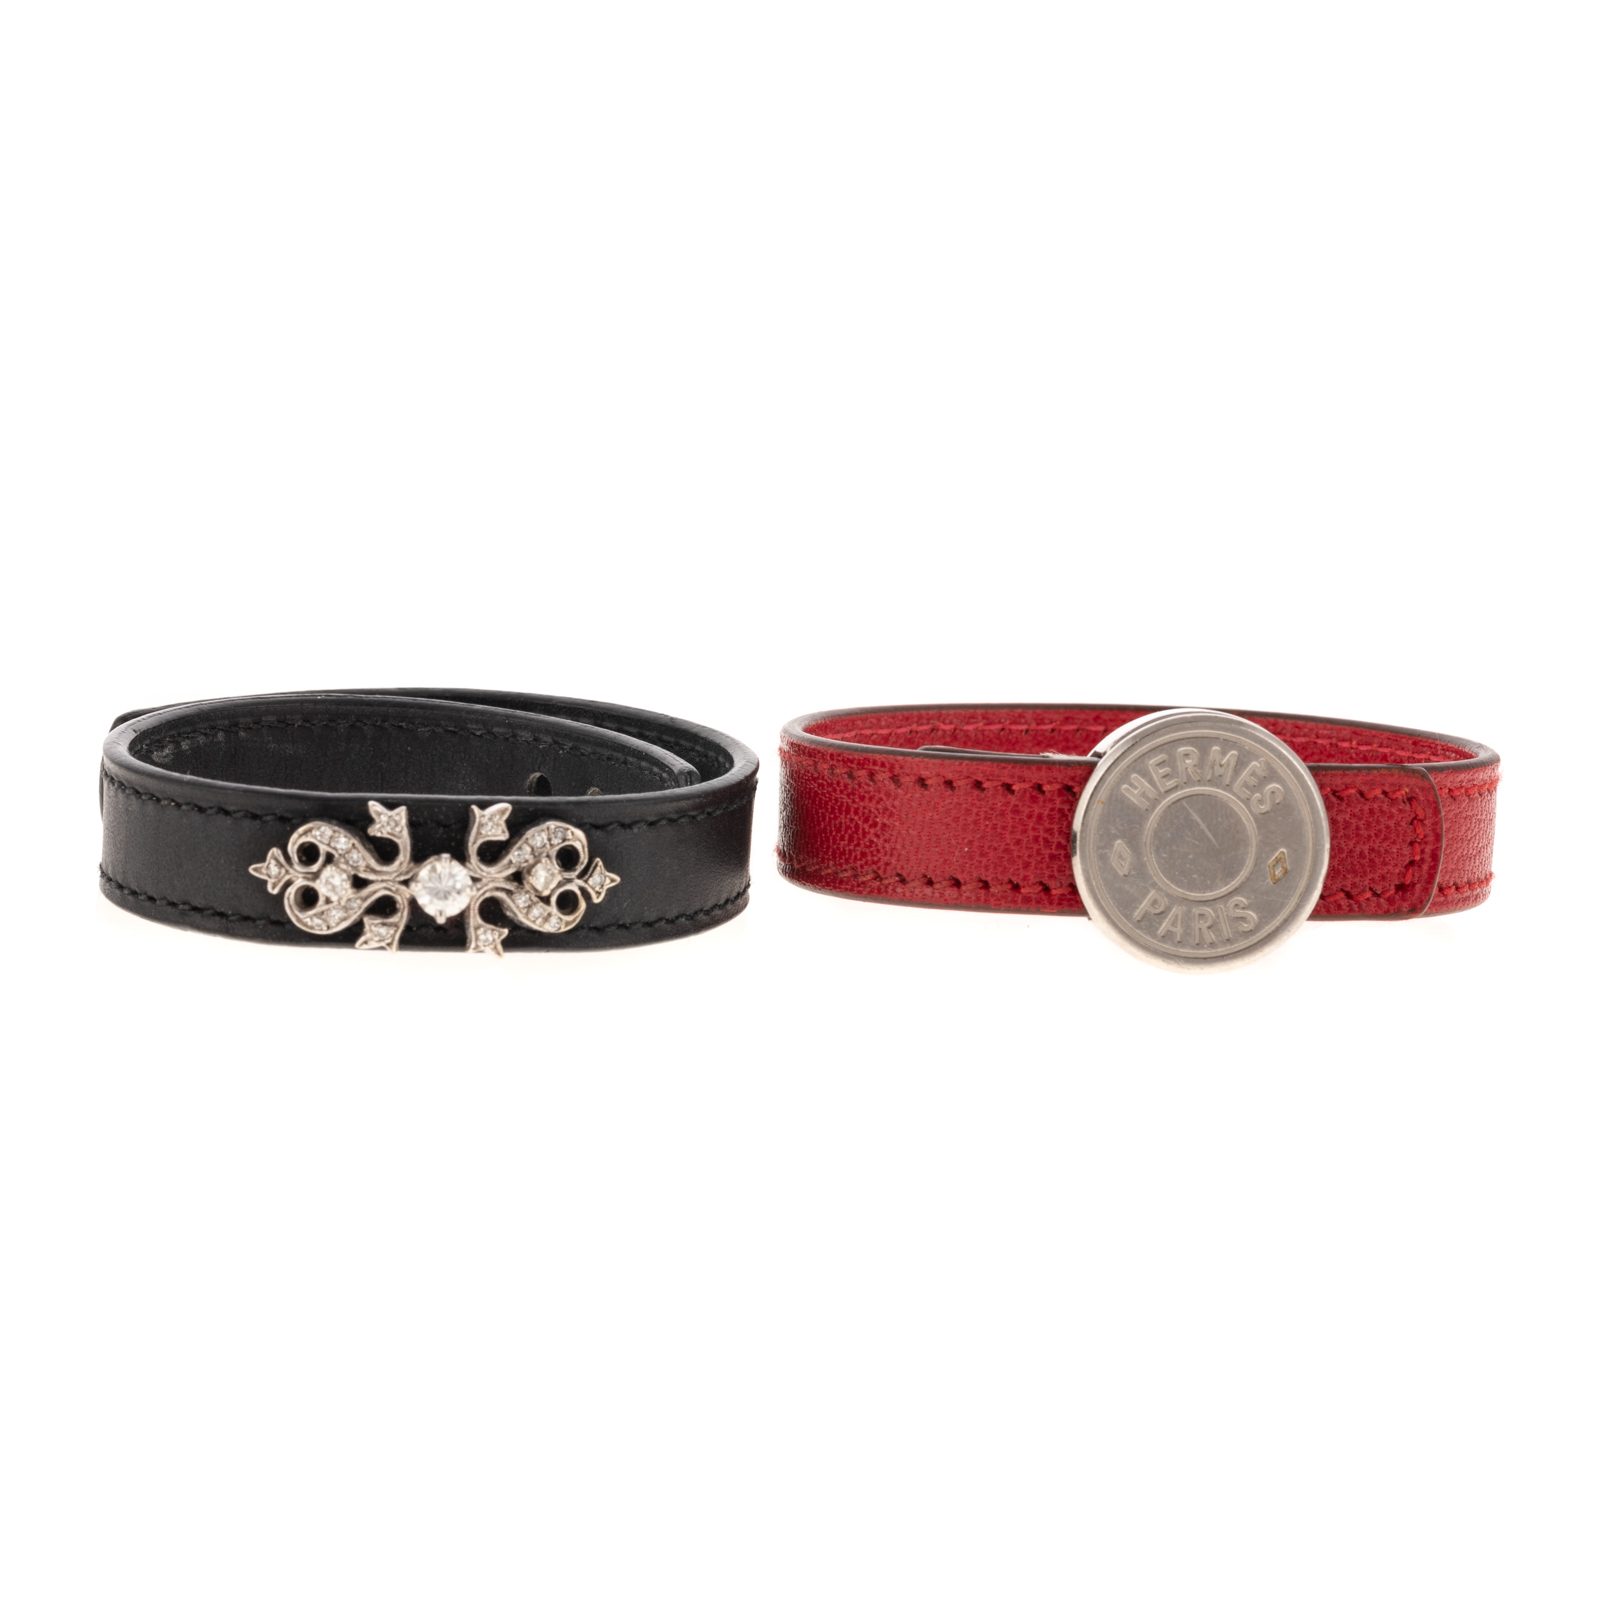 AN HERMES WRAP BRACELET A red leather